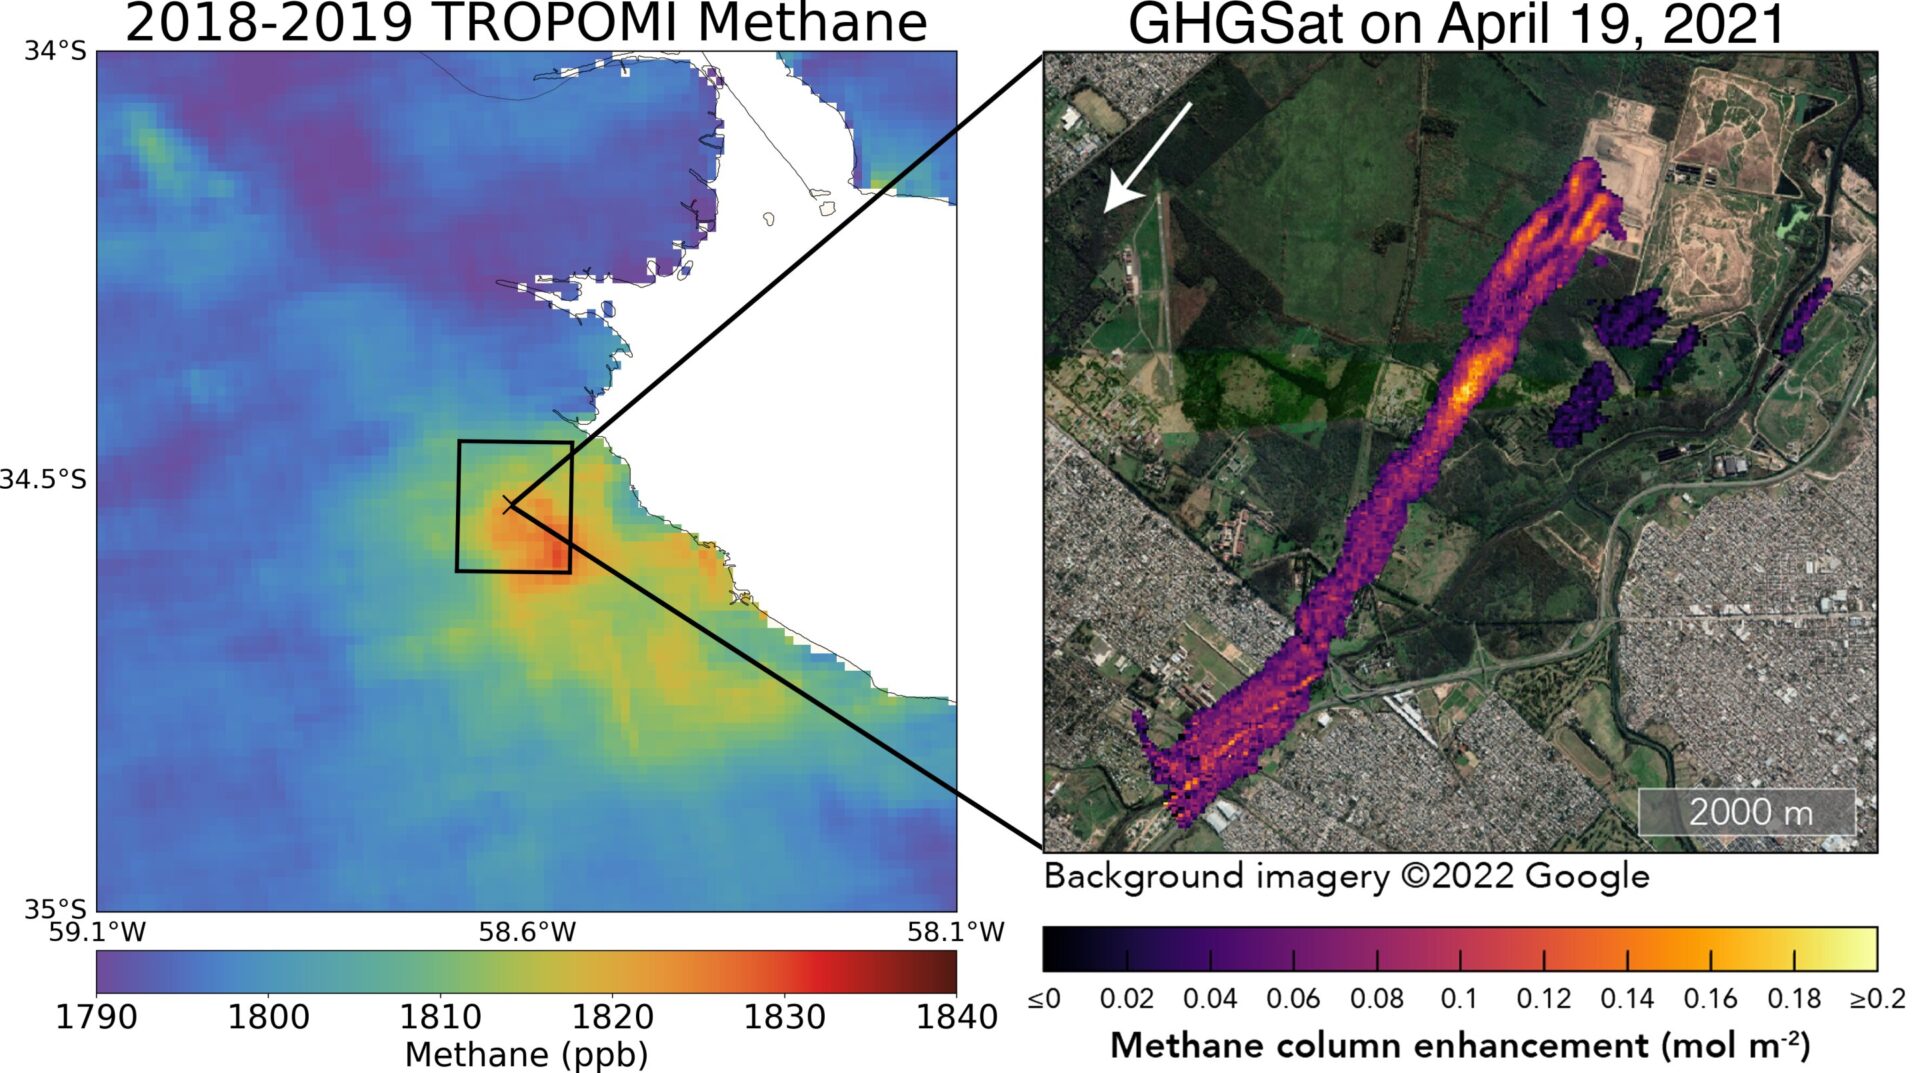 Left: methane concentrations measured by Tropomi during 2018-2019 around Buenos Aires, Argentina. Right: zoom-in by GHGSat on April 19th 2021, showing methane plumes from the landfill in the city centre. The wind direction is given by the white arrow. SRON/GHGSat, contains Copernicus Sentinel data (2018–2019), processed by SRON